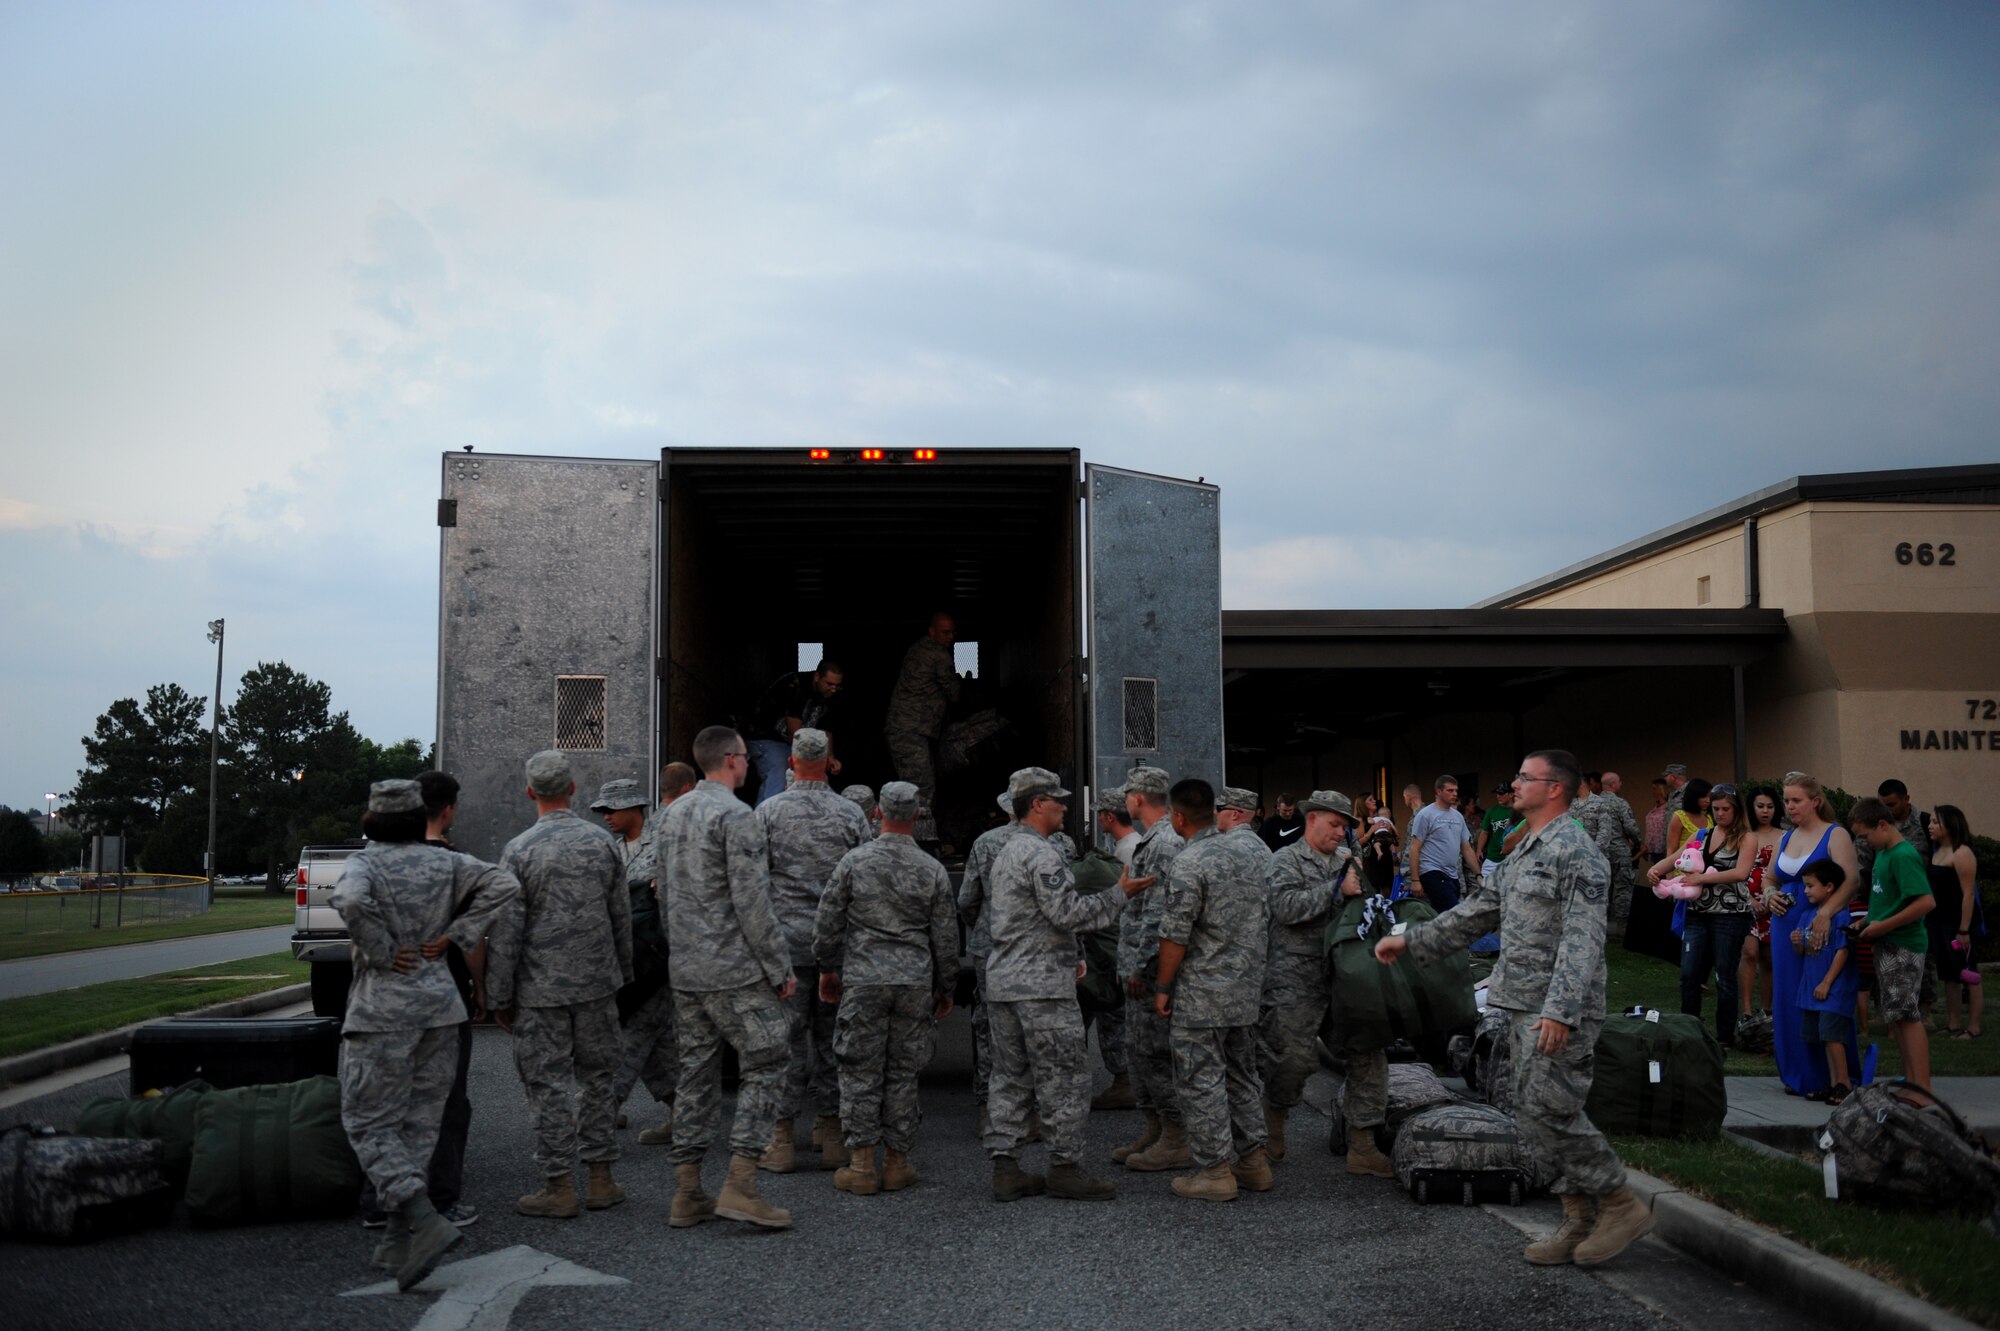 MOODY AIR FORCE BASE, Ga. -- Airmen unload luggage off of a truck here June 16. Deployed Airmen take approximately three to four bags of clothes and equipment with them to perform their mission in a deployed location. (U.S. Air Force photo by Staff Sgt. Gina Chiaverotti-Paige/RELEASED)